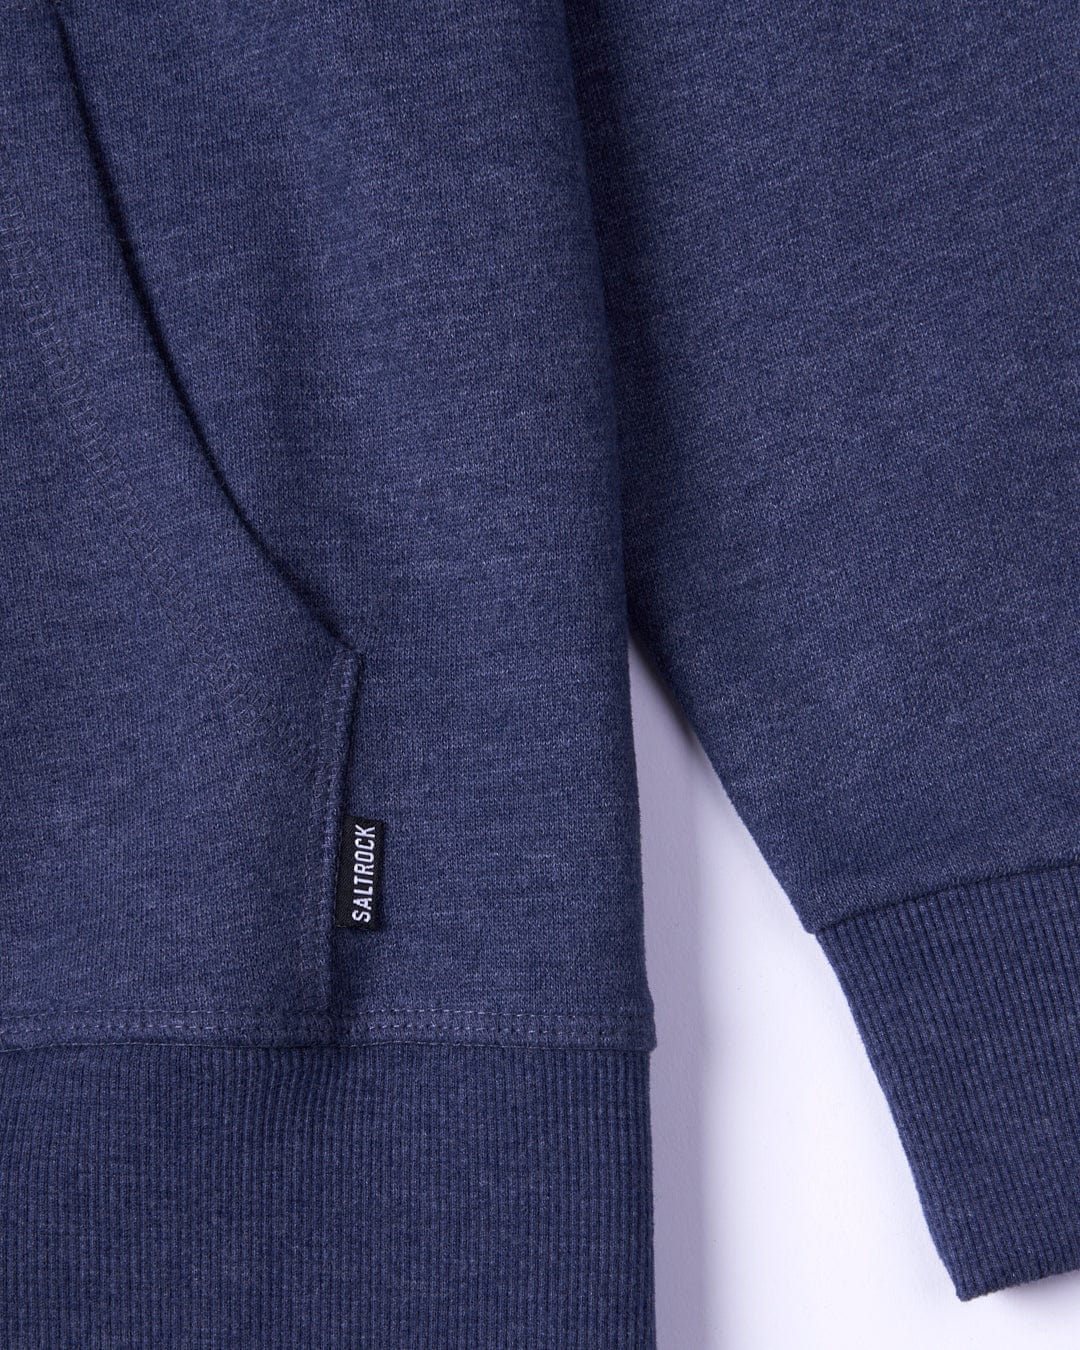 Close-up view of a navy blue Velator - Womens Pop Hoodie by Saltrock showing the soft material and a Saltrock branding label on the side seam.